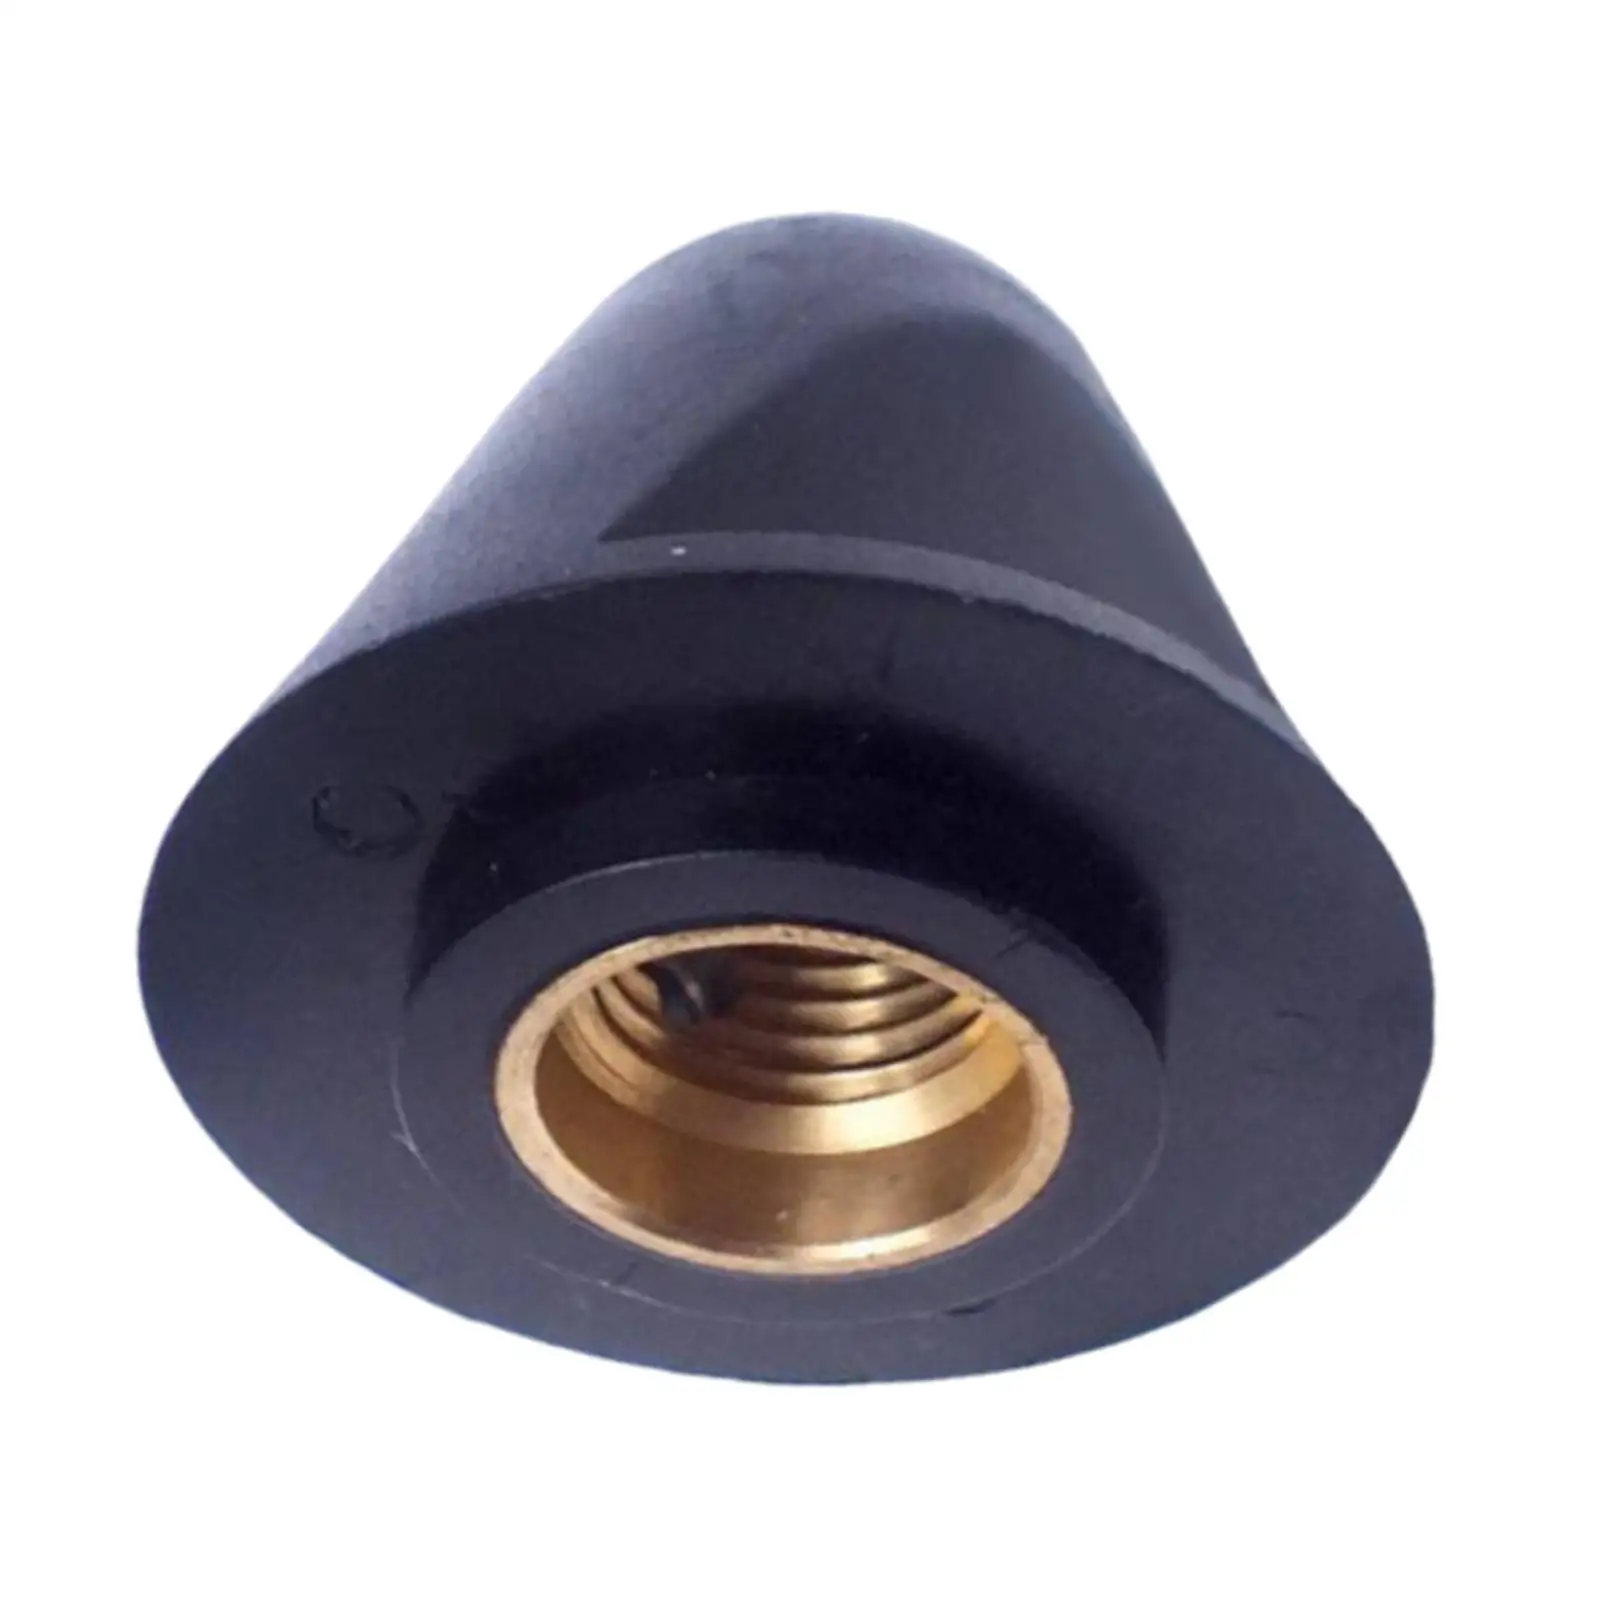 Propeller Prop Nut Easy to Use Premium Durable 626-45616-01 Replaces for Yamaha Outboard Engine Old Version 6HP 8HP 9.9HP